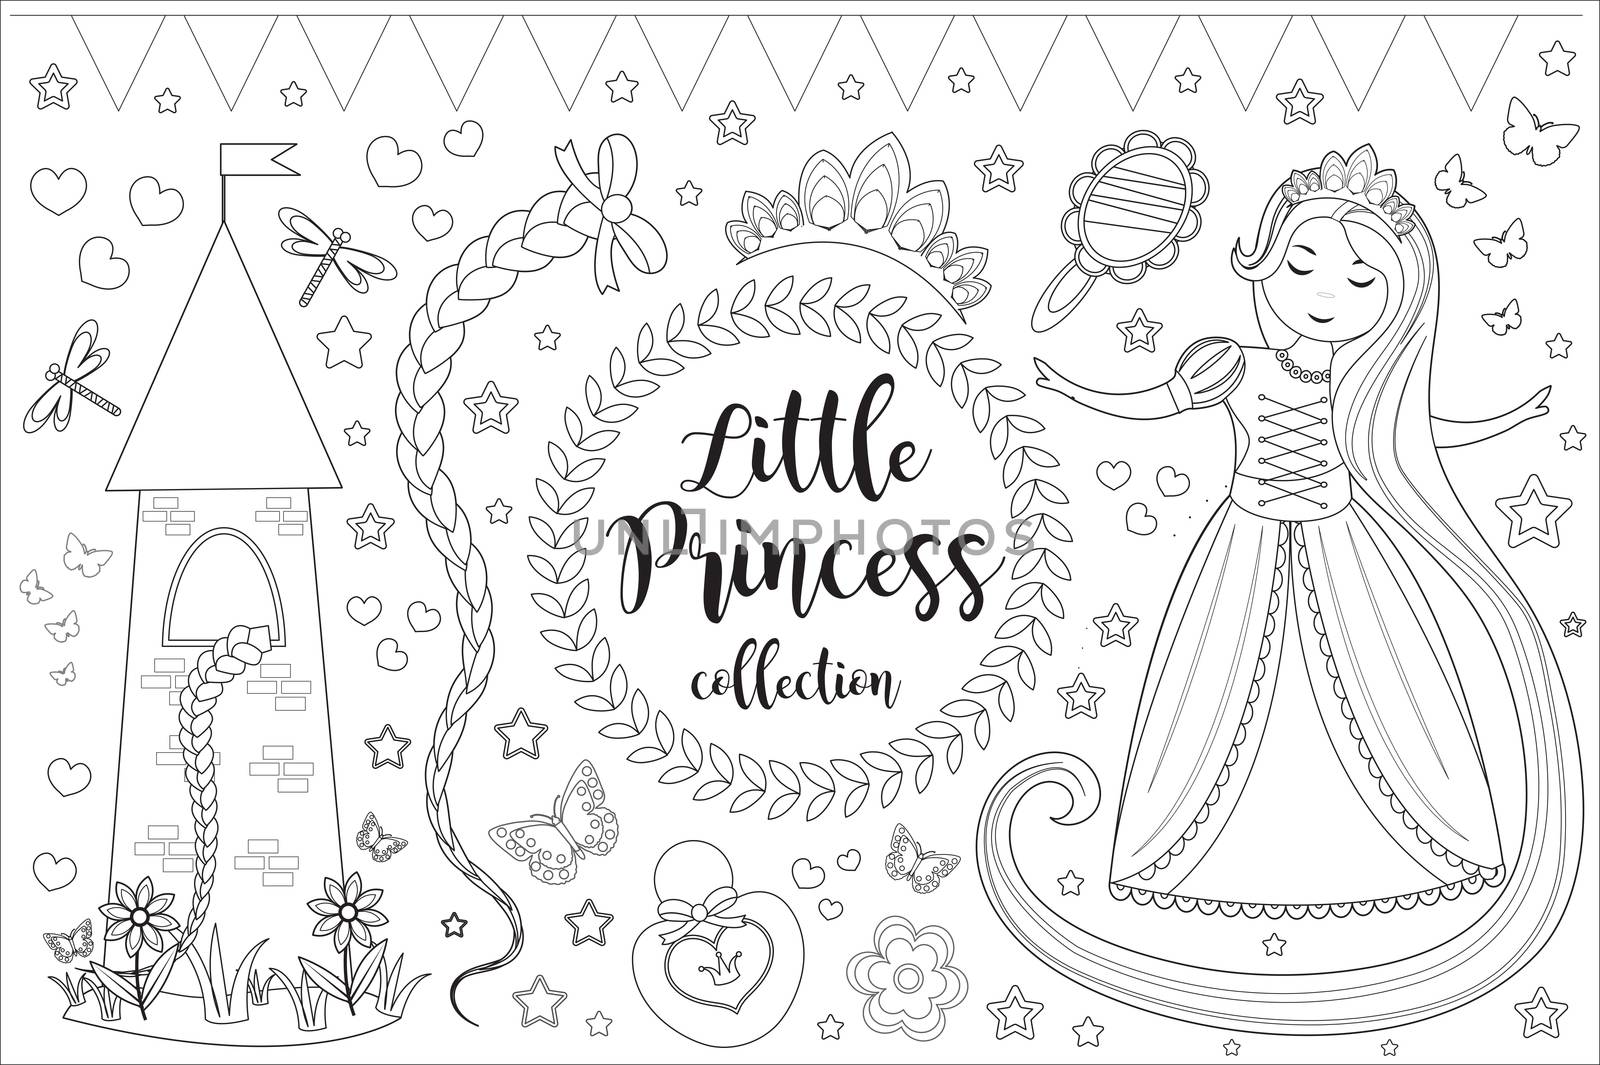 Cute little princess Rapunzel set Coloring book page for kids. Collection of design element sketch outline, doodle style. Kids baby clip art funny smiling kit. illustration by lucia_fox